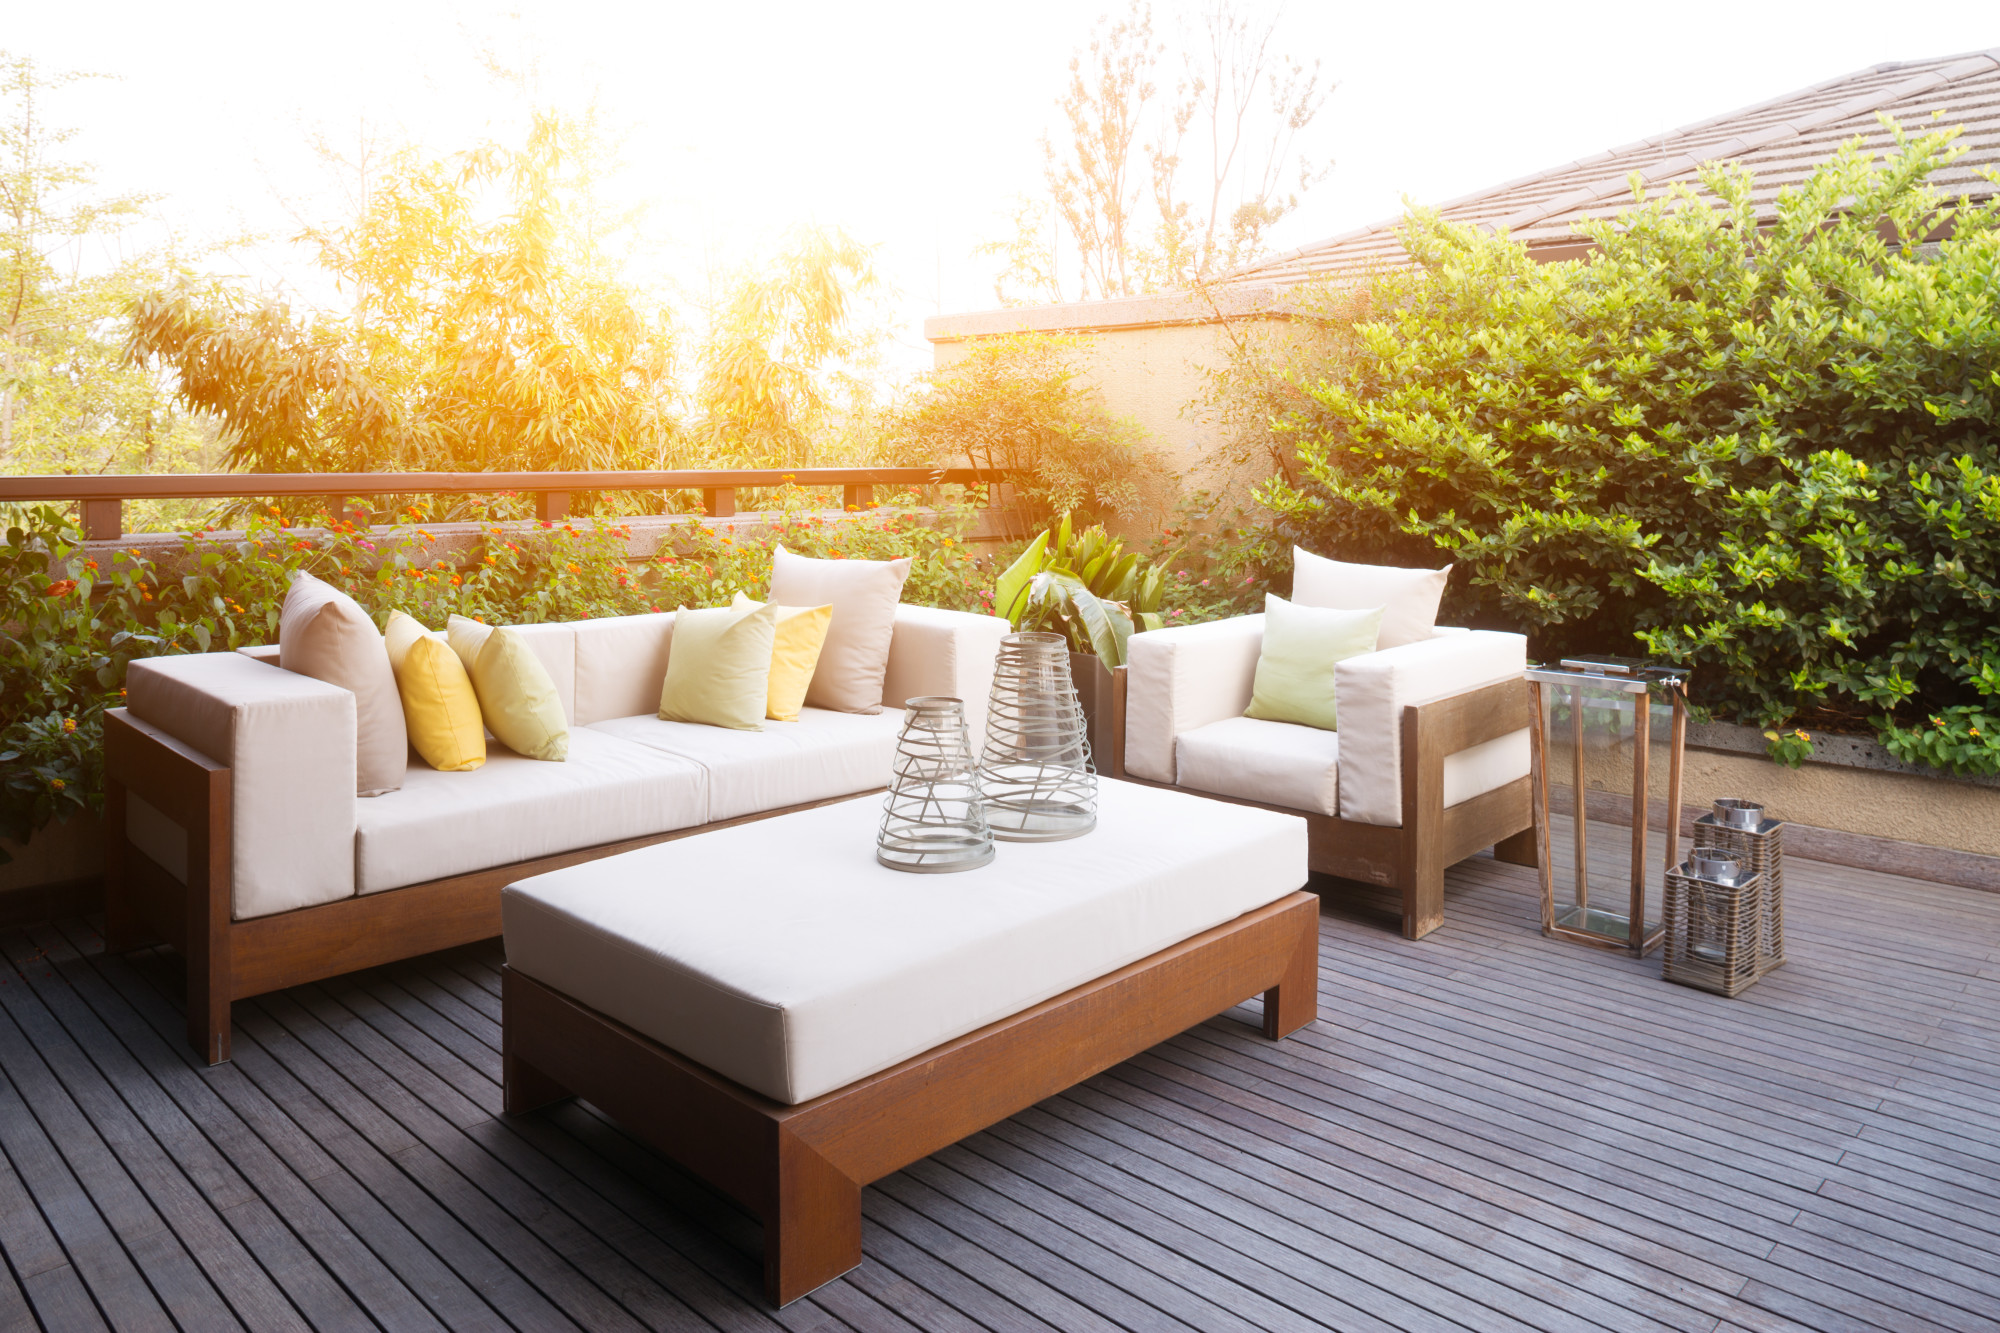 3 Tips for Creating a Backyard Paradise